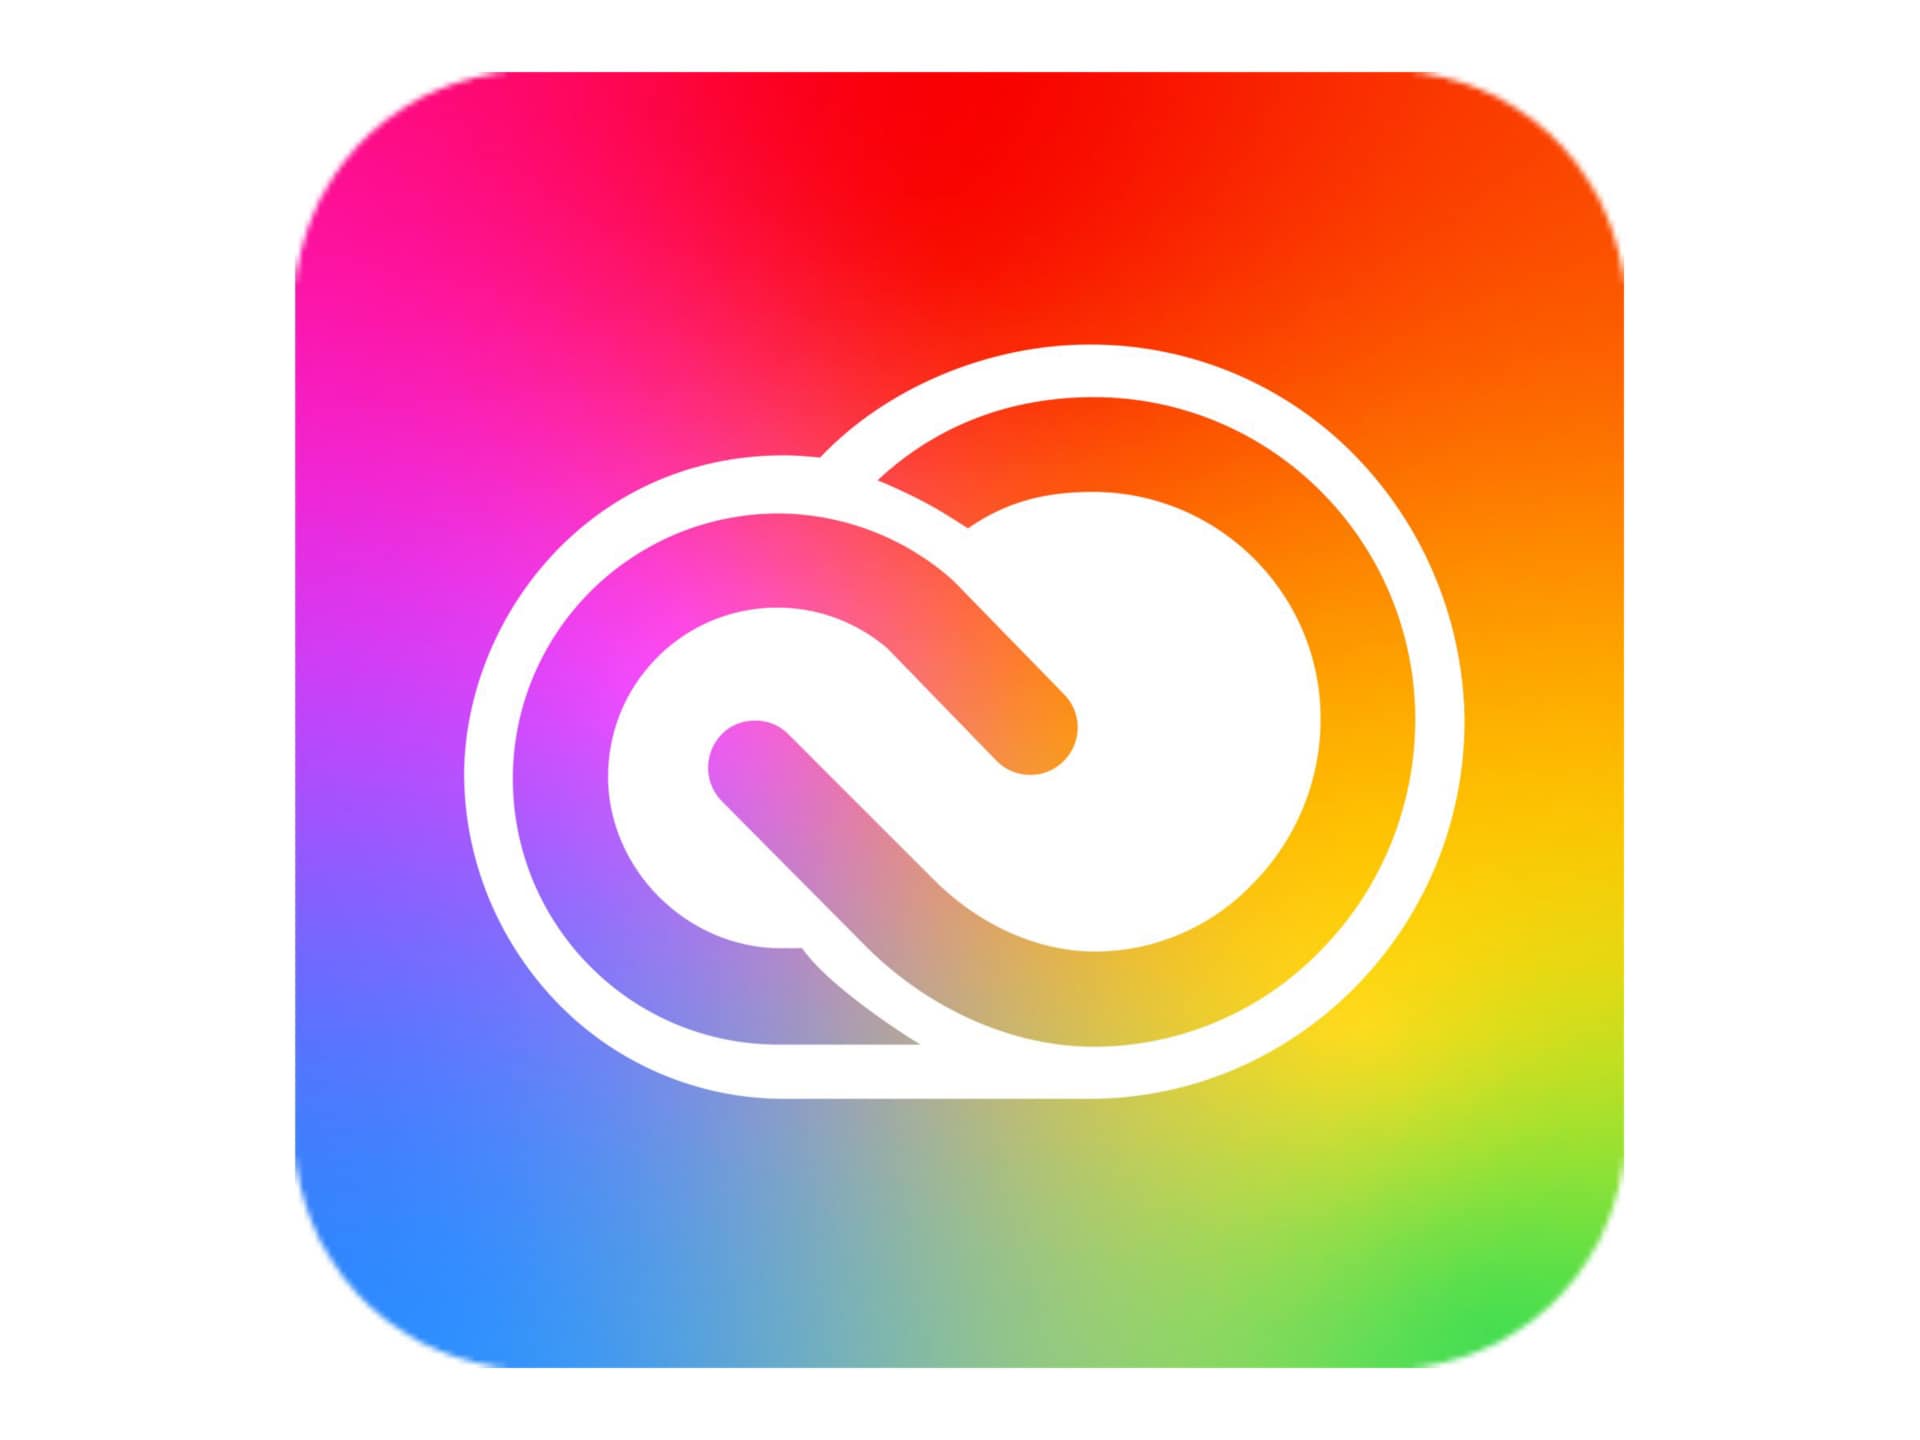 Adobe Creative Cloud All Apps - Pro for teams - Subscription New - 1 user